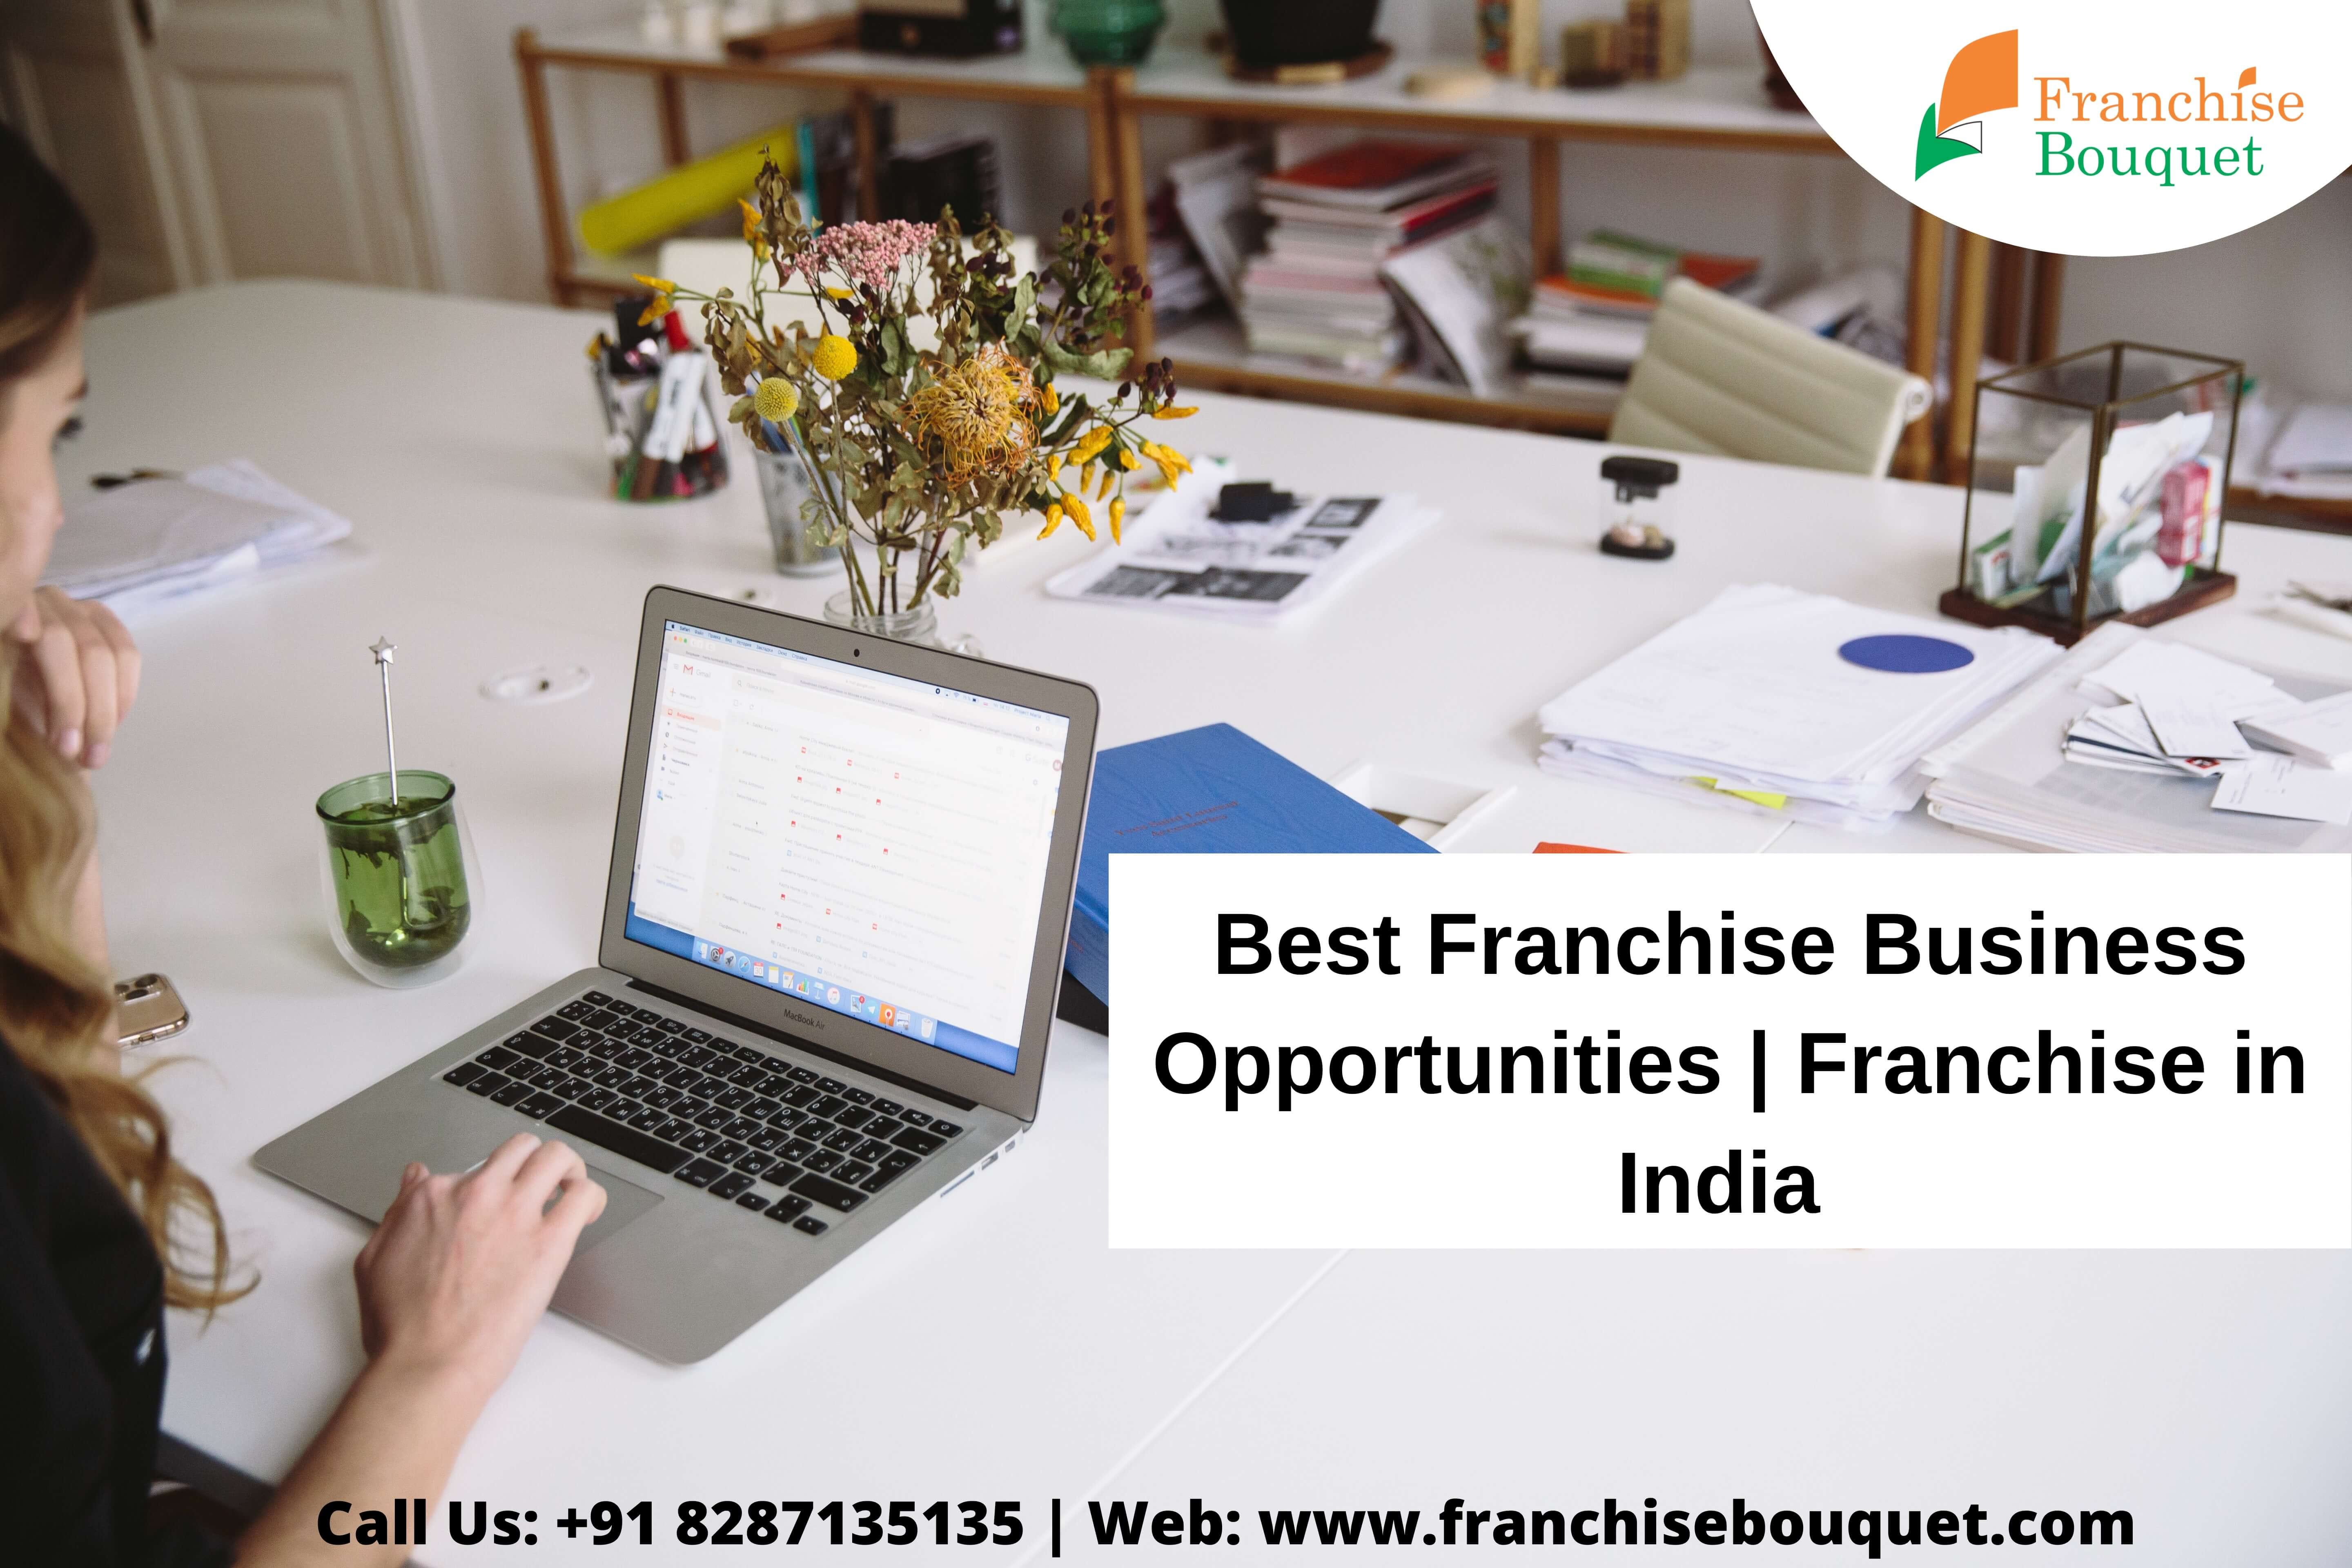 Franchise Business Opportunities in India